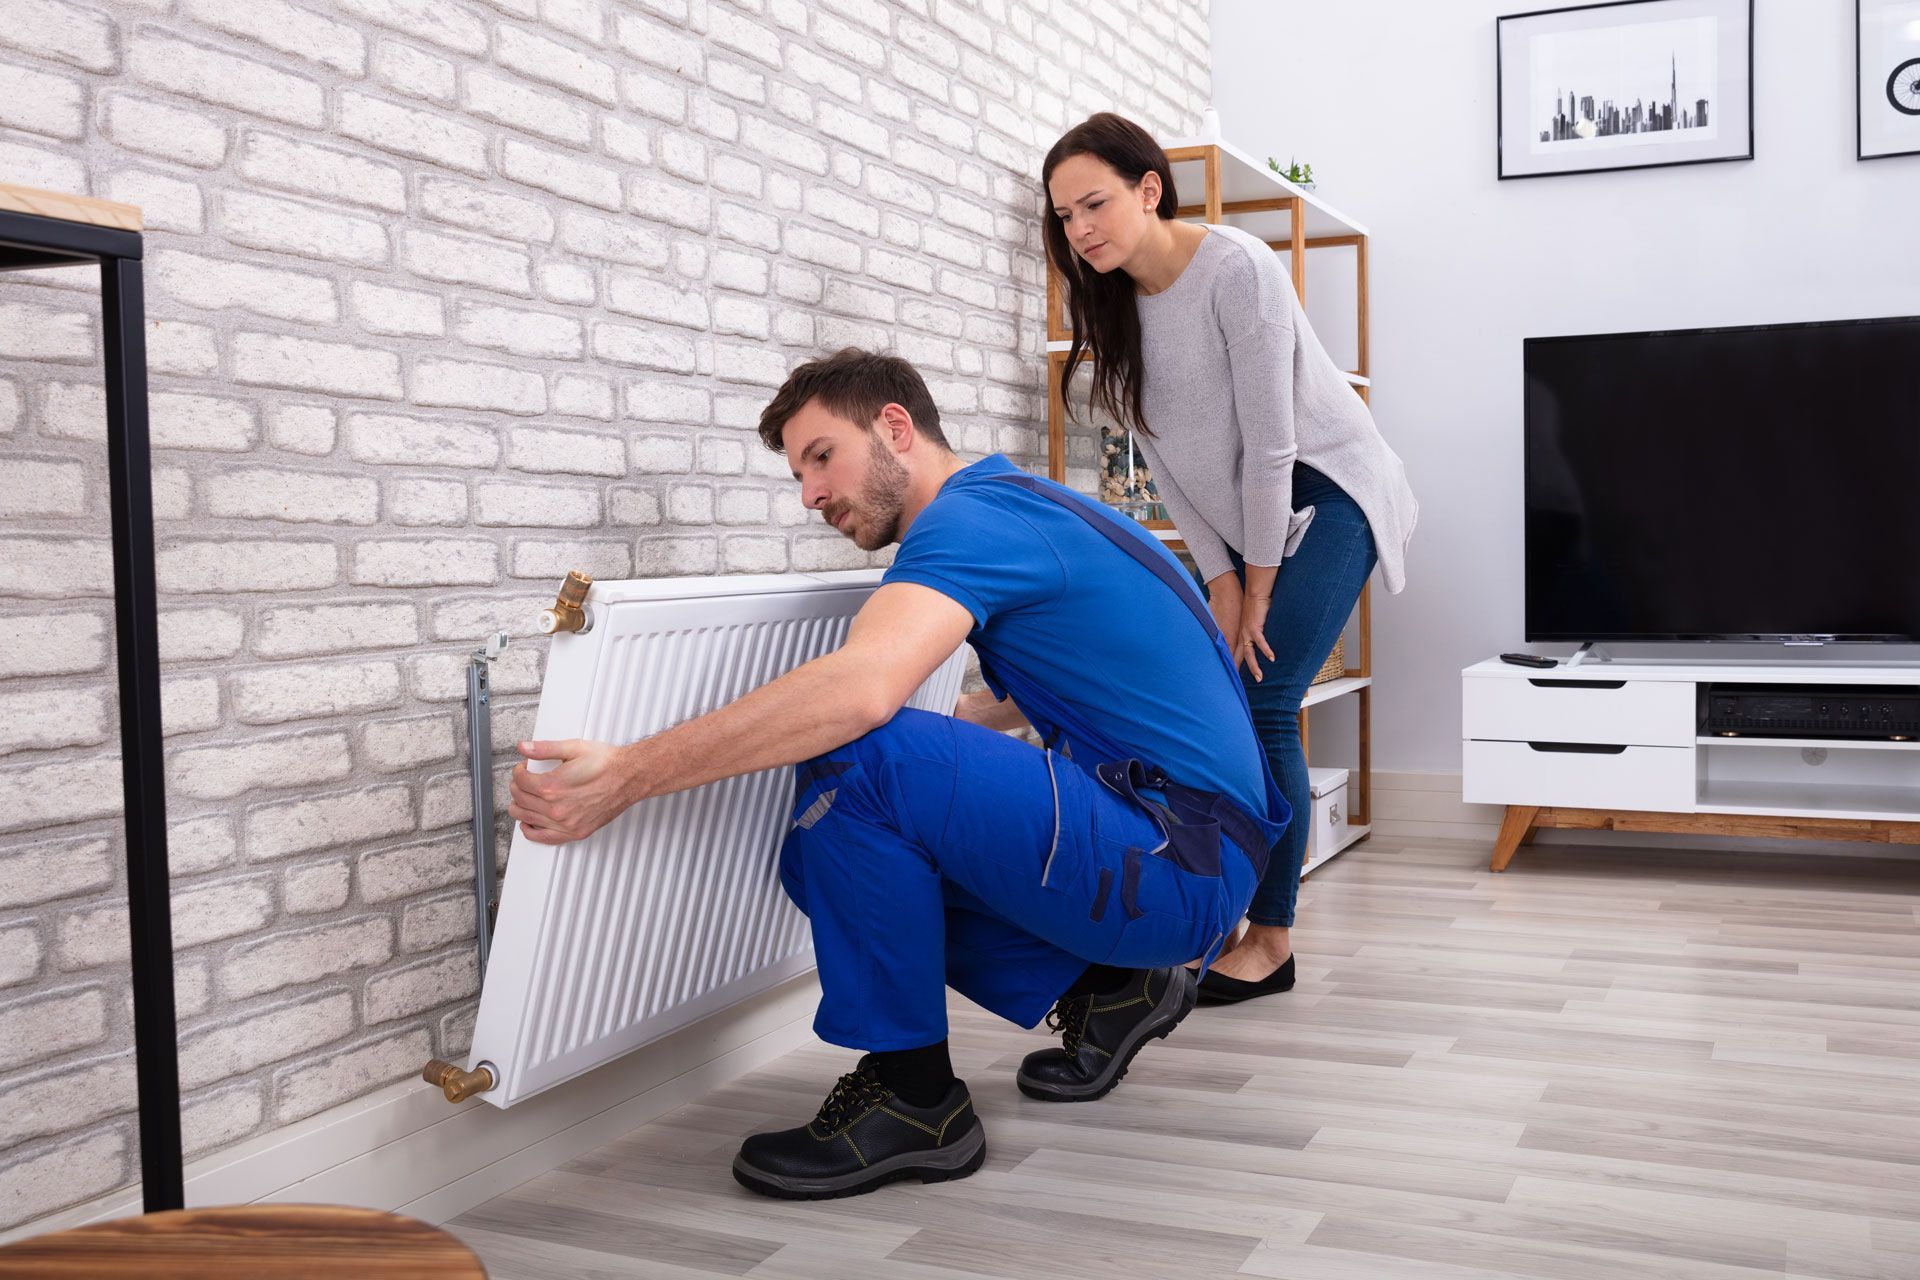 A man is installing a radiator in a living room while a woman watches.